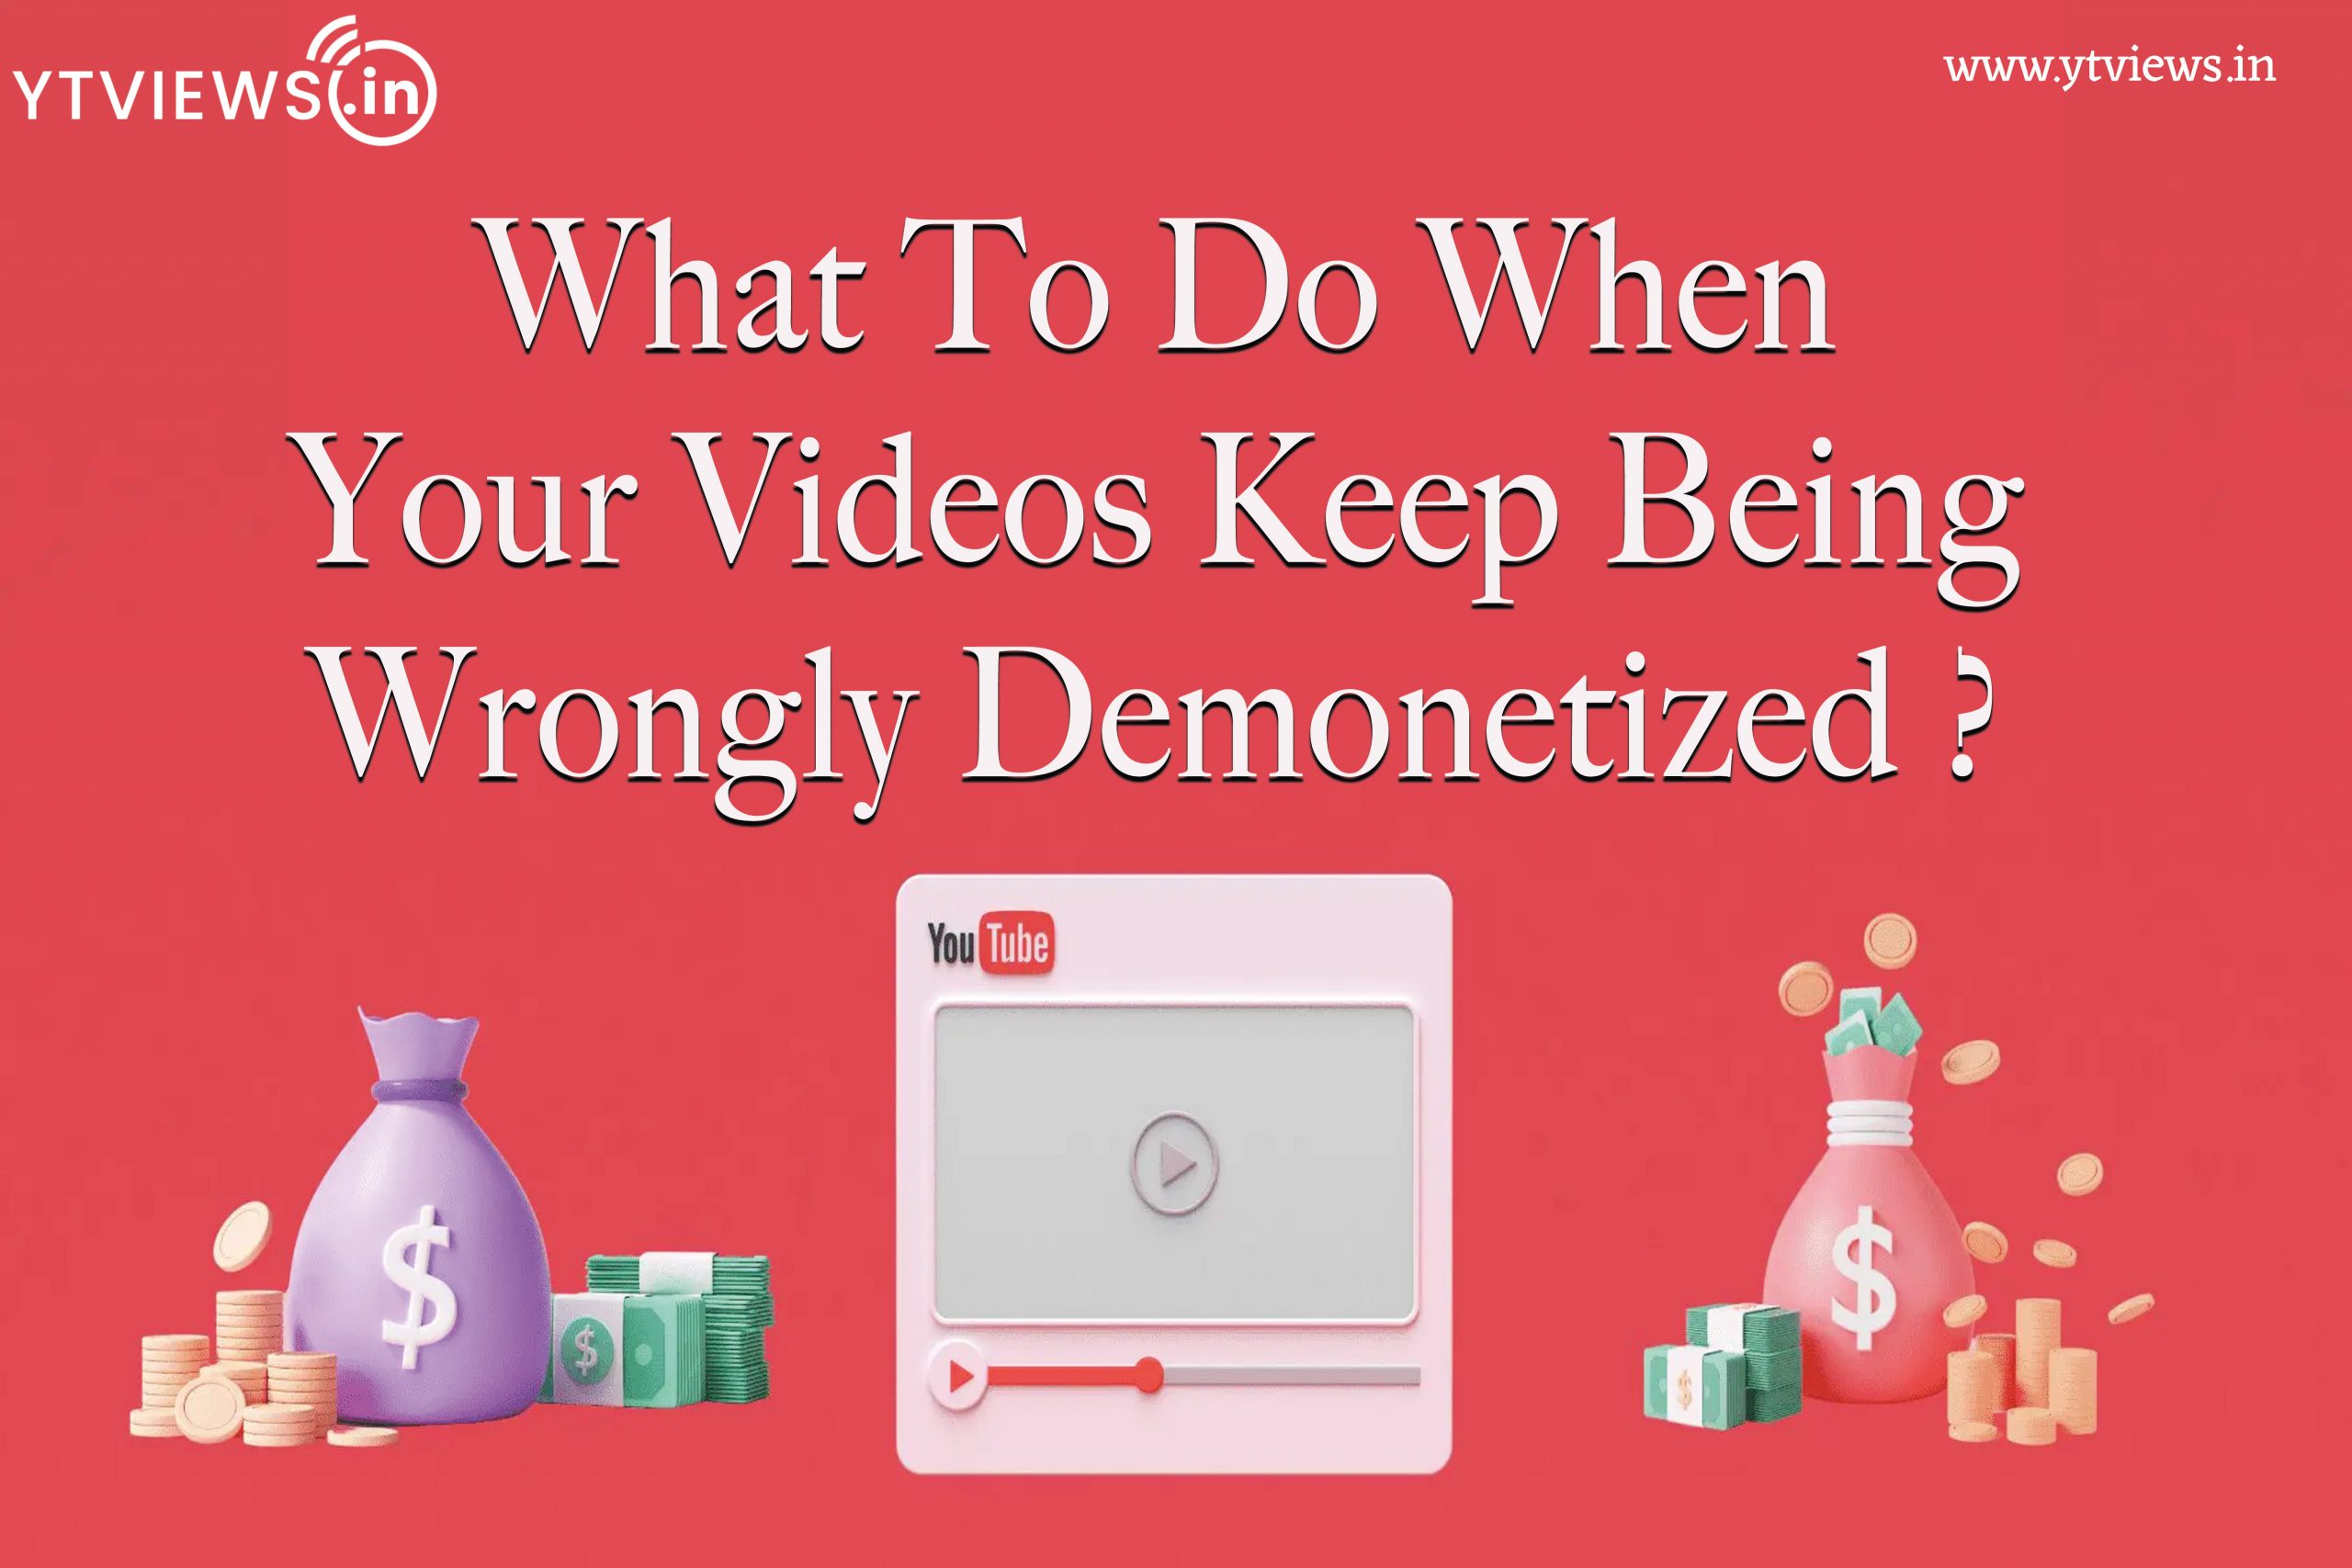 What To Do When Your Videos Keep Being Wrongly Demonetized